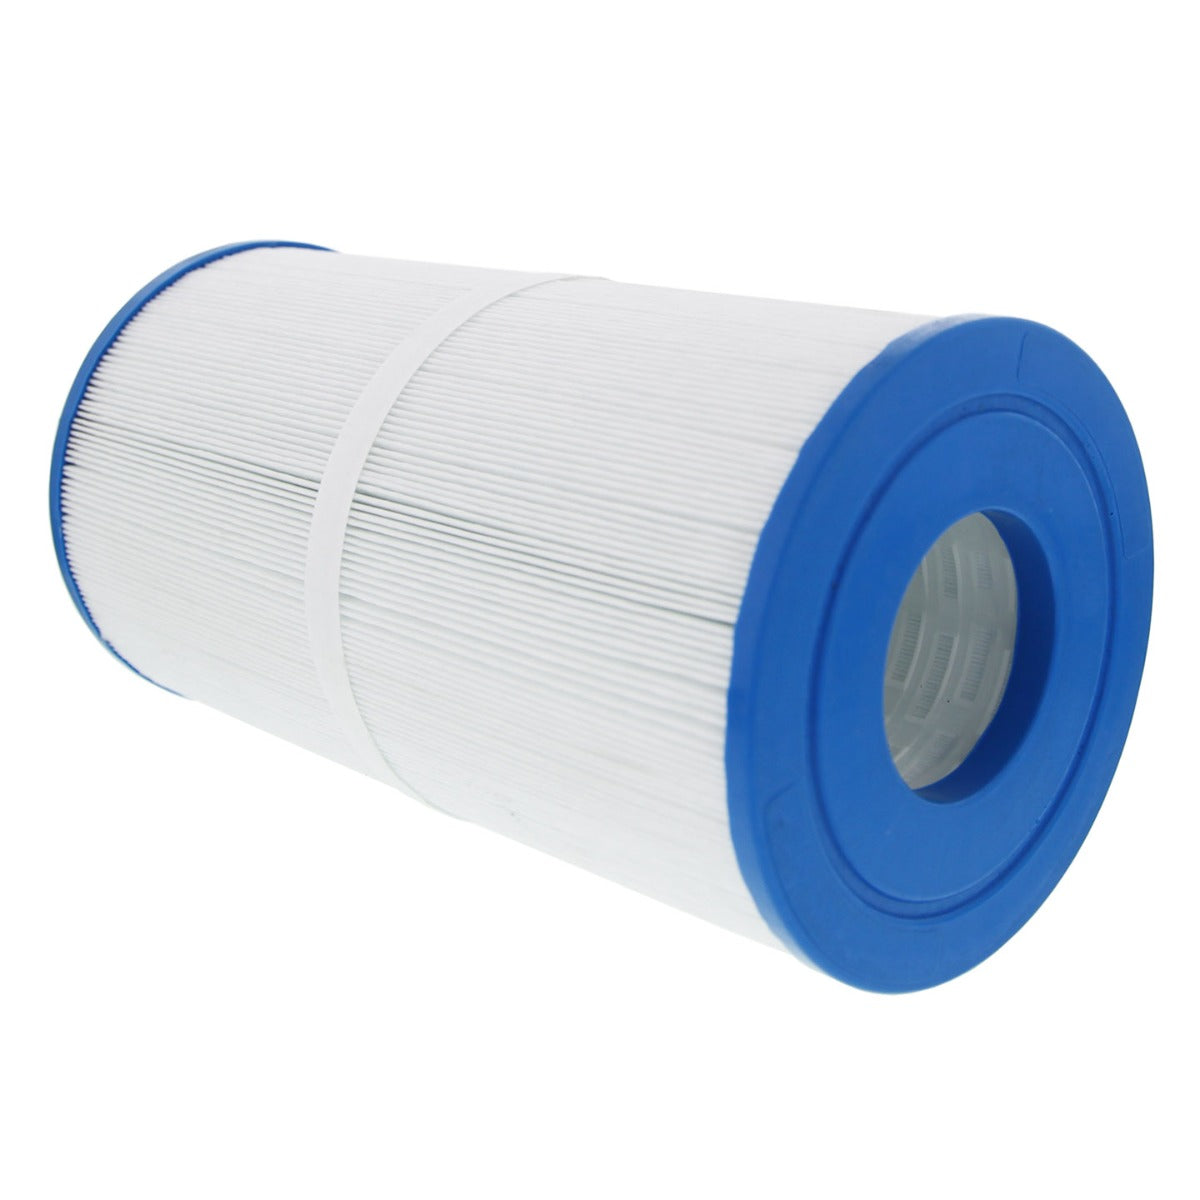 Tier1 Brand Replacement Filter for 03FIL1300, 17-2482, 25393, 303557, 817-3501, CCP269 & R173431